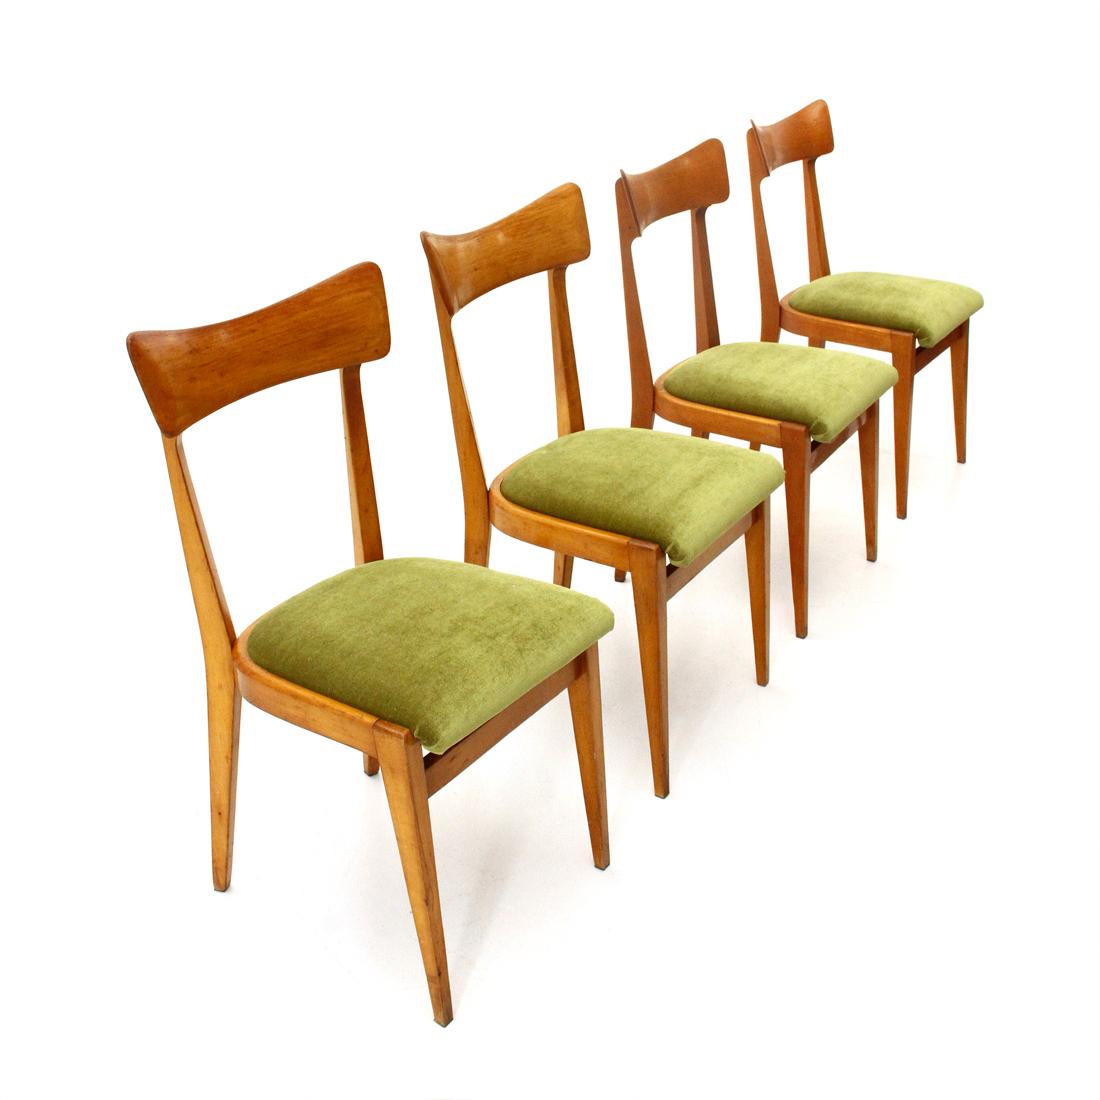 4 chairs of Italian manufacture produced in the 1950s.
Solid wood structure.
Back in curved and shaped wood.
Padded seat lined with new green velvet fabric.

Good general conditions, some signs due to normal use over time.

Dimensions: Length